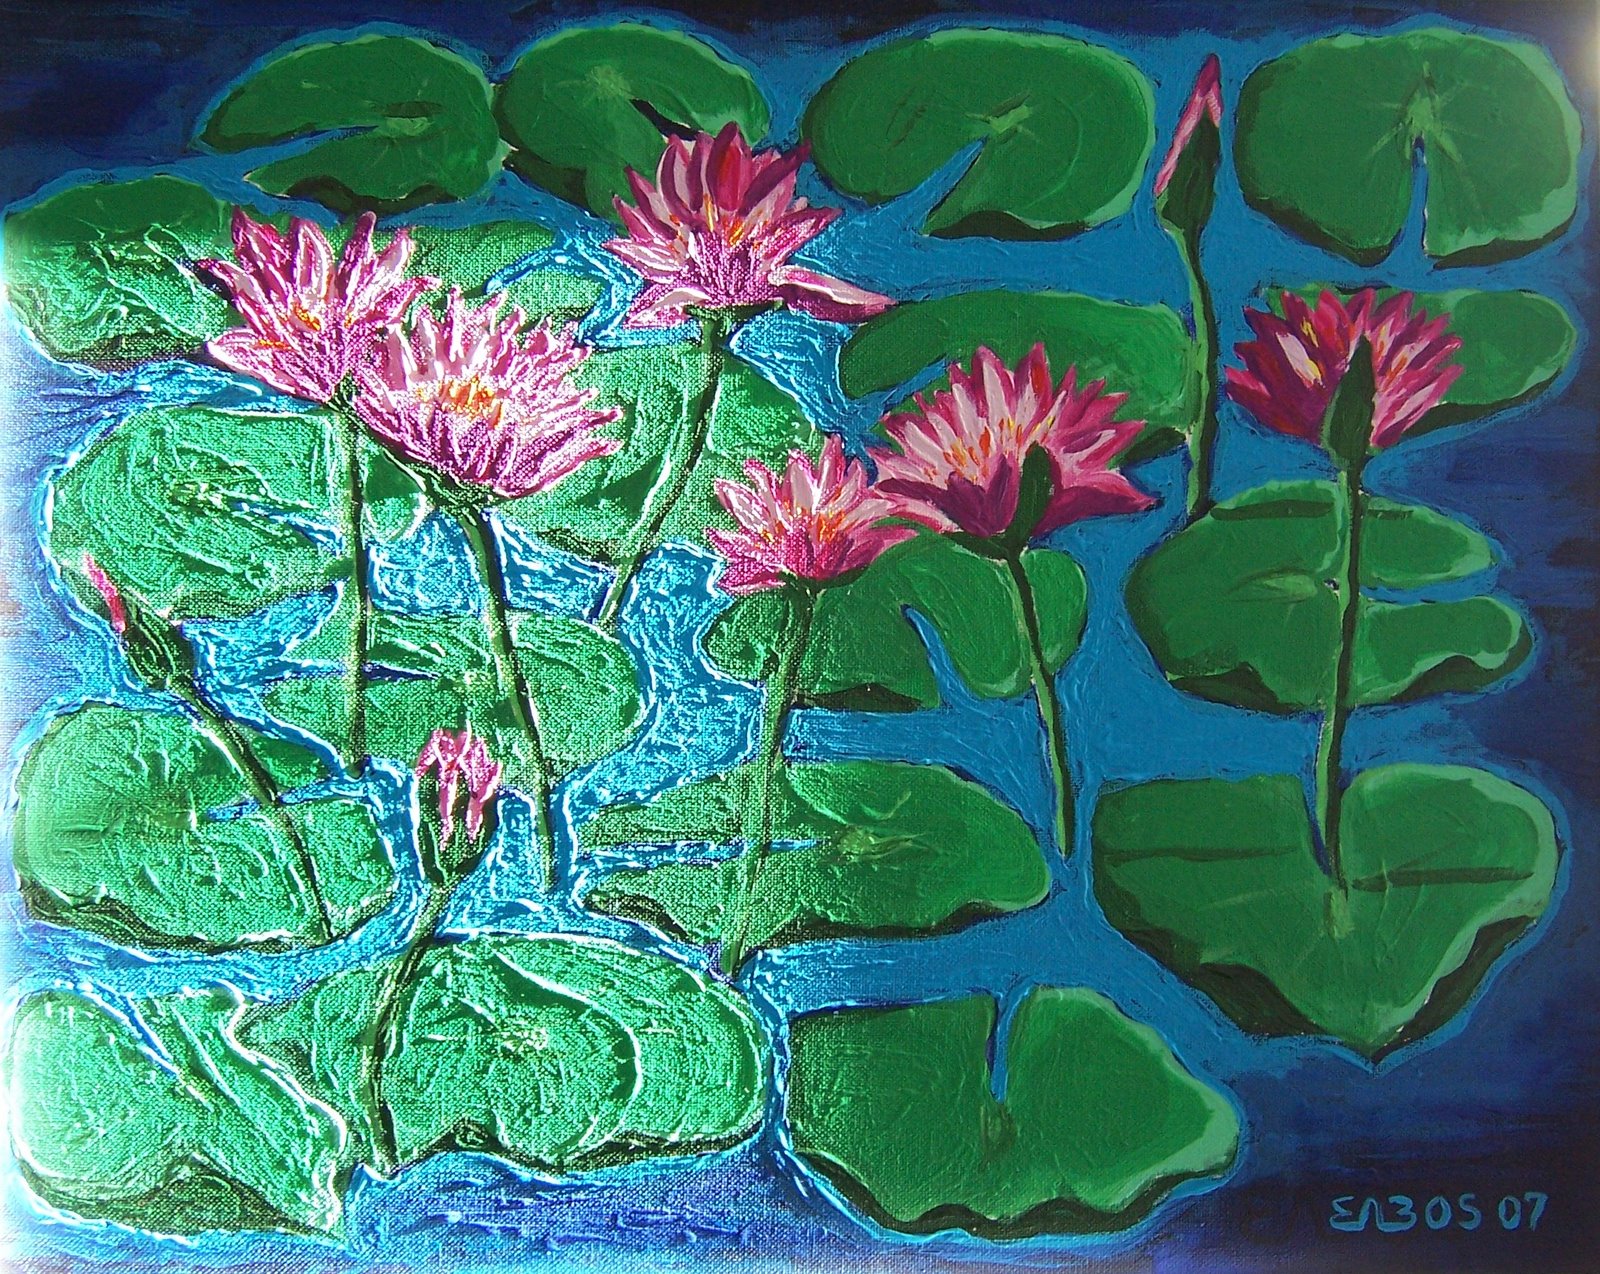 [Tibor+Babos+-+Water+Lillies+in+the+Morning+Rays+1,+Acrylic+on+Canvas,+30X40+cm,++2007,+Brussels.jpg]